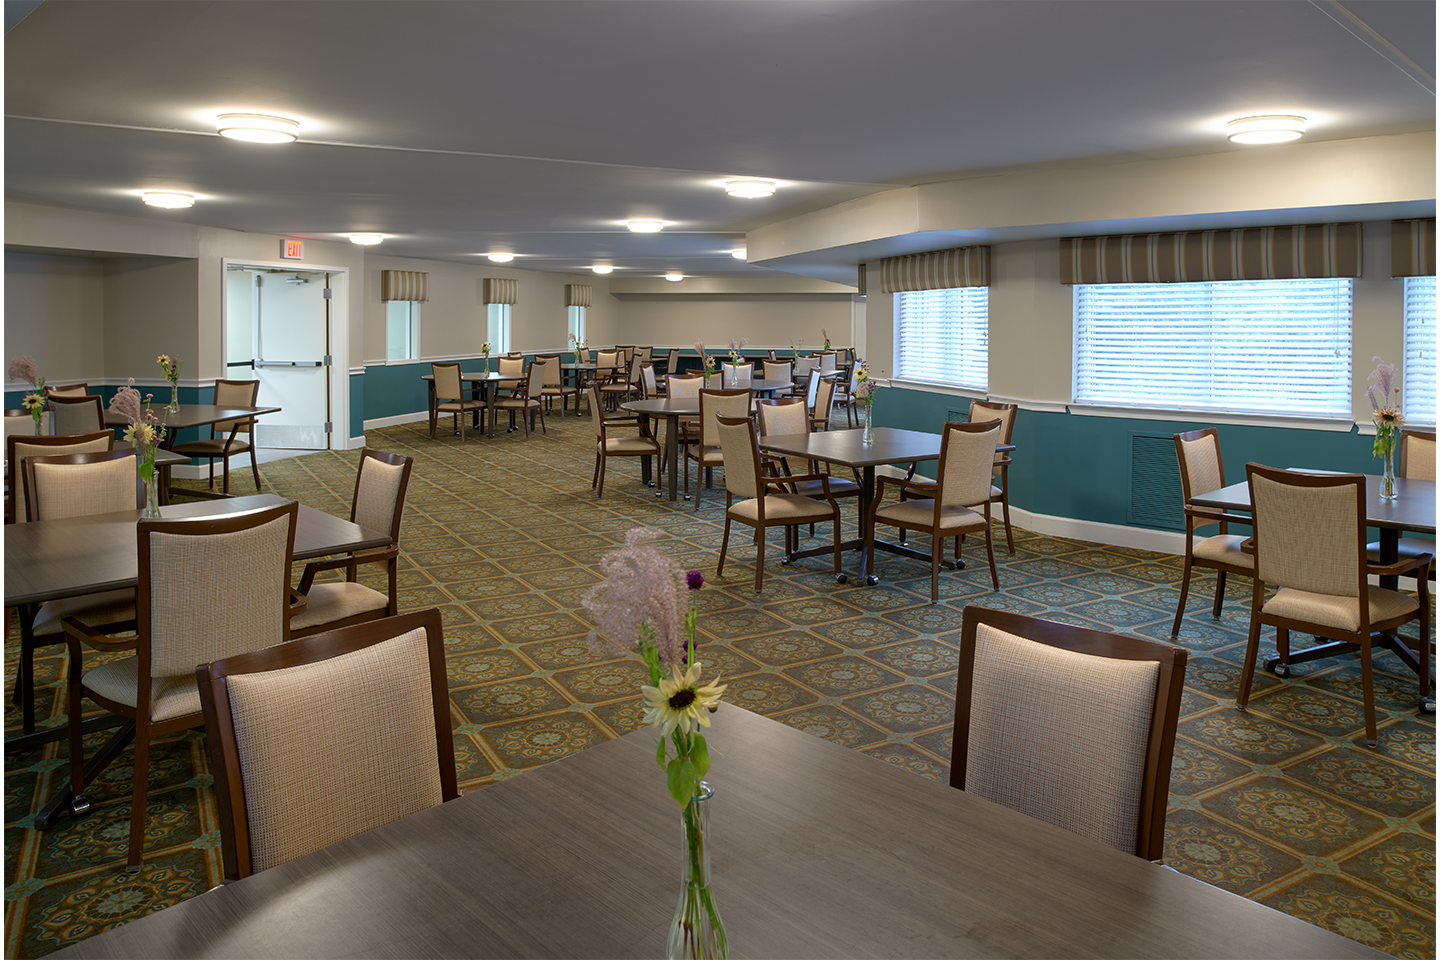 Dining room at American House Grand Blanc, a retirement community in the Flint metropolitan area.